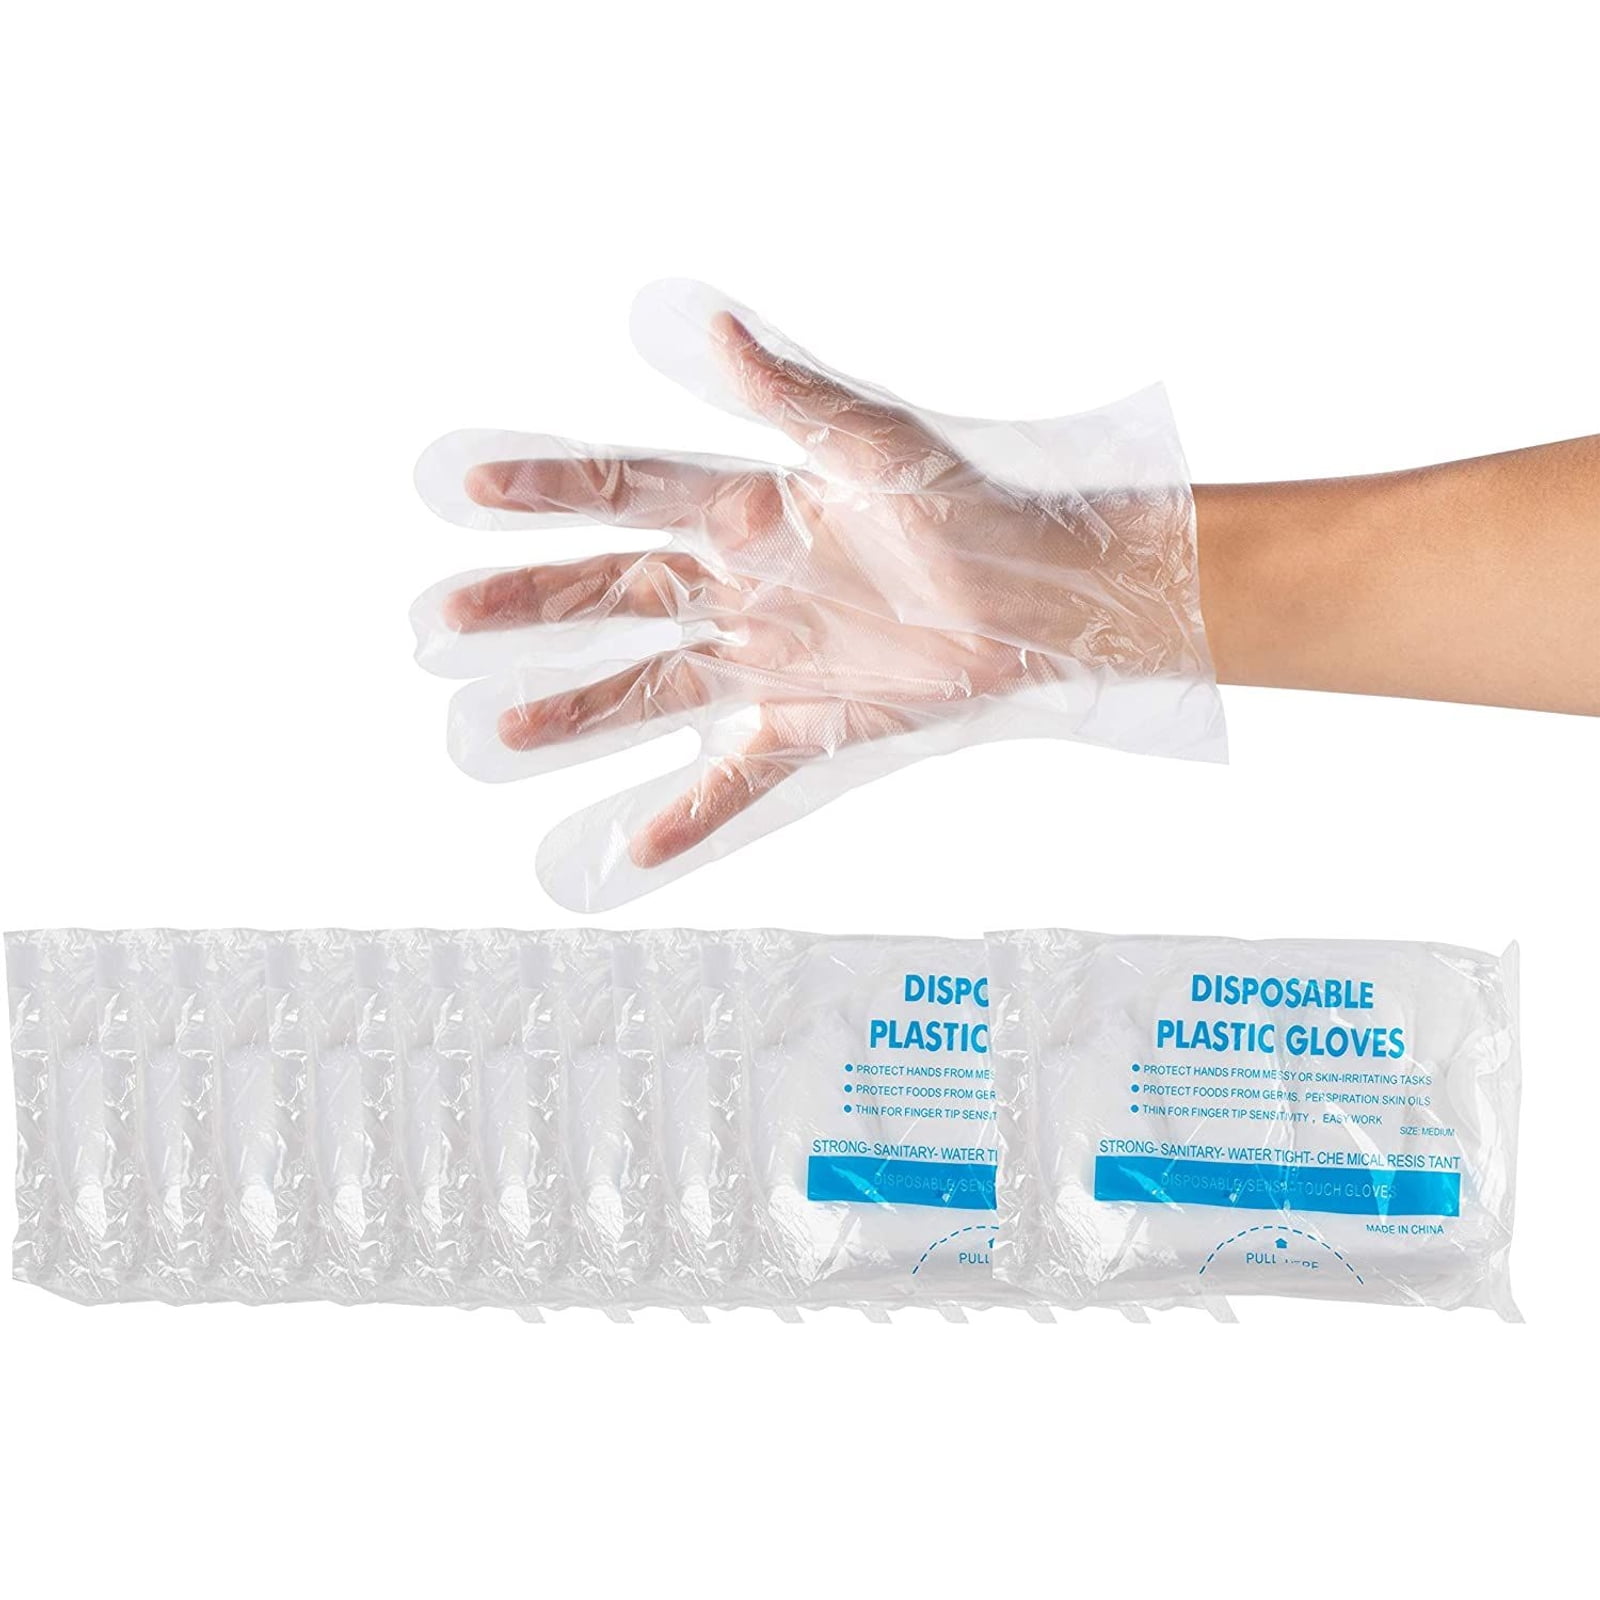 Choice 100 Count Disposable Food Service Poly Gloves SIZE S/M/L FREE SHIPPING US 